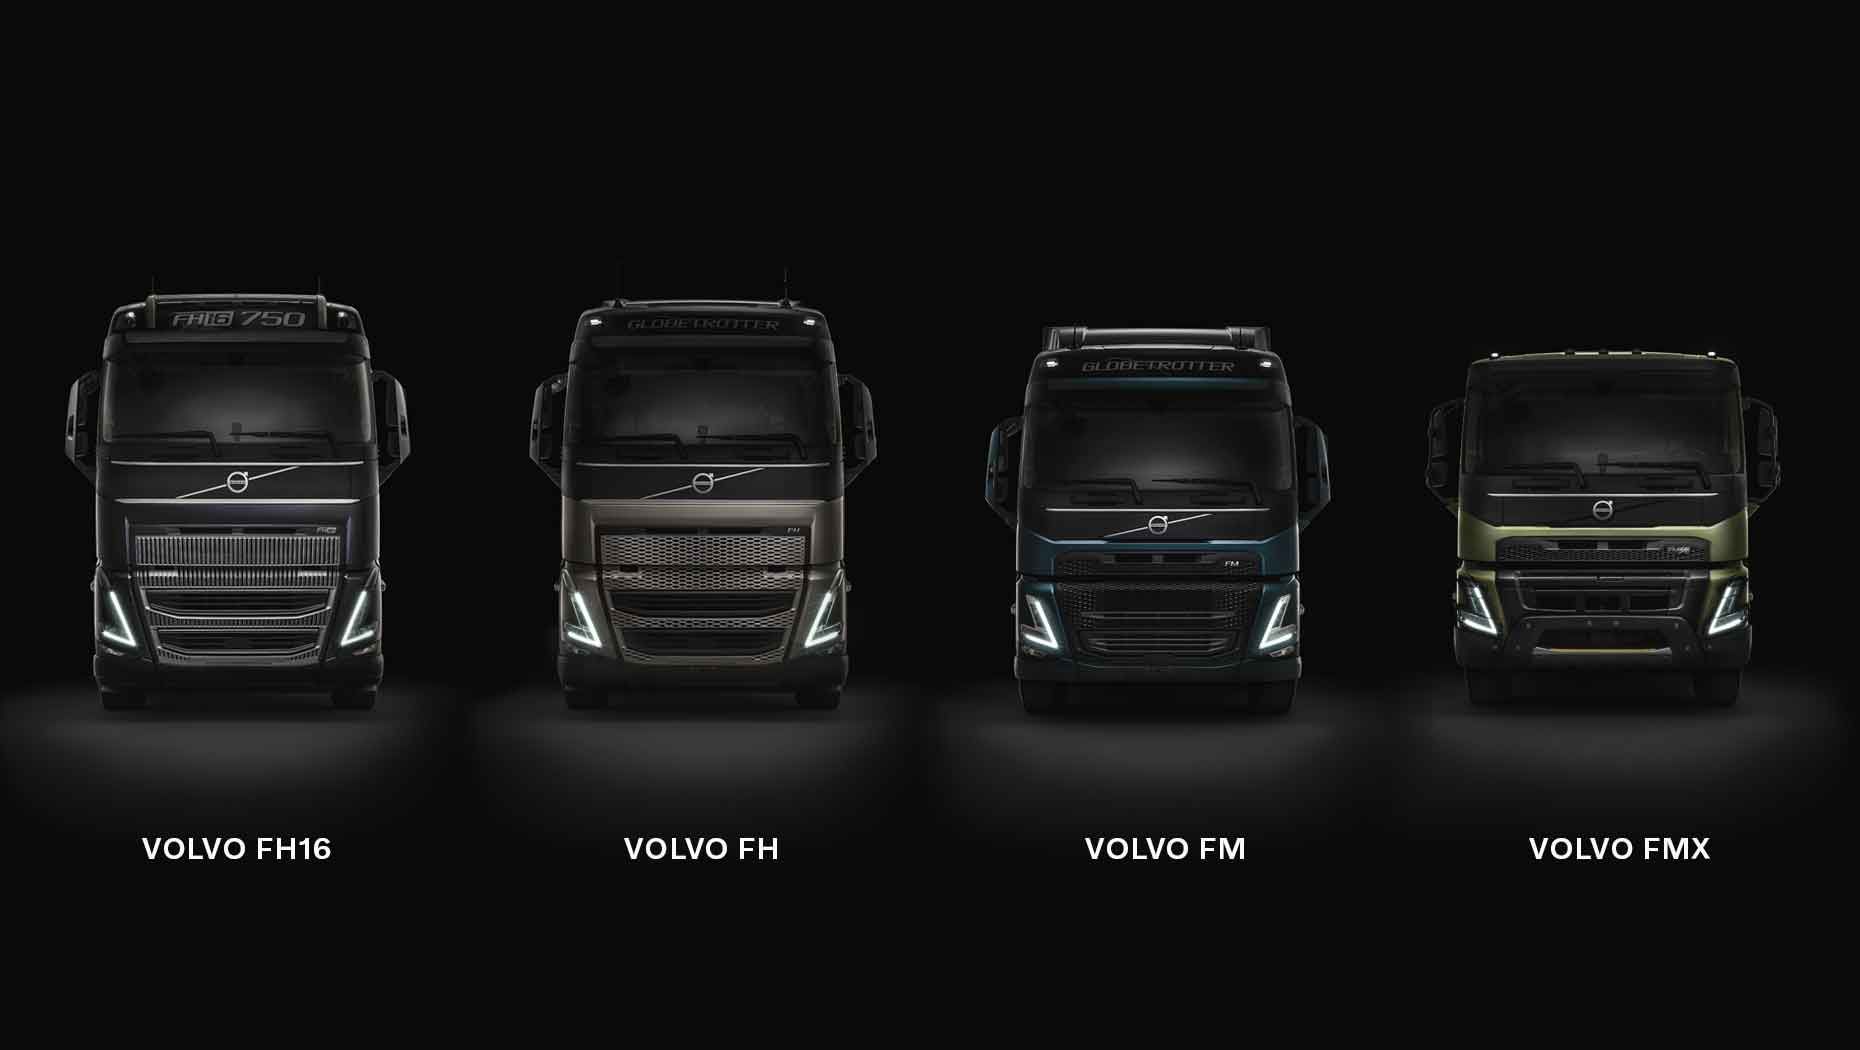 Front view of the Volvo FH16, Volvo FH, Volvo FM and Volvo FMX with a dark background